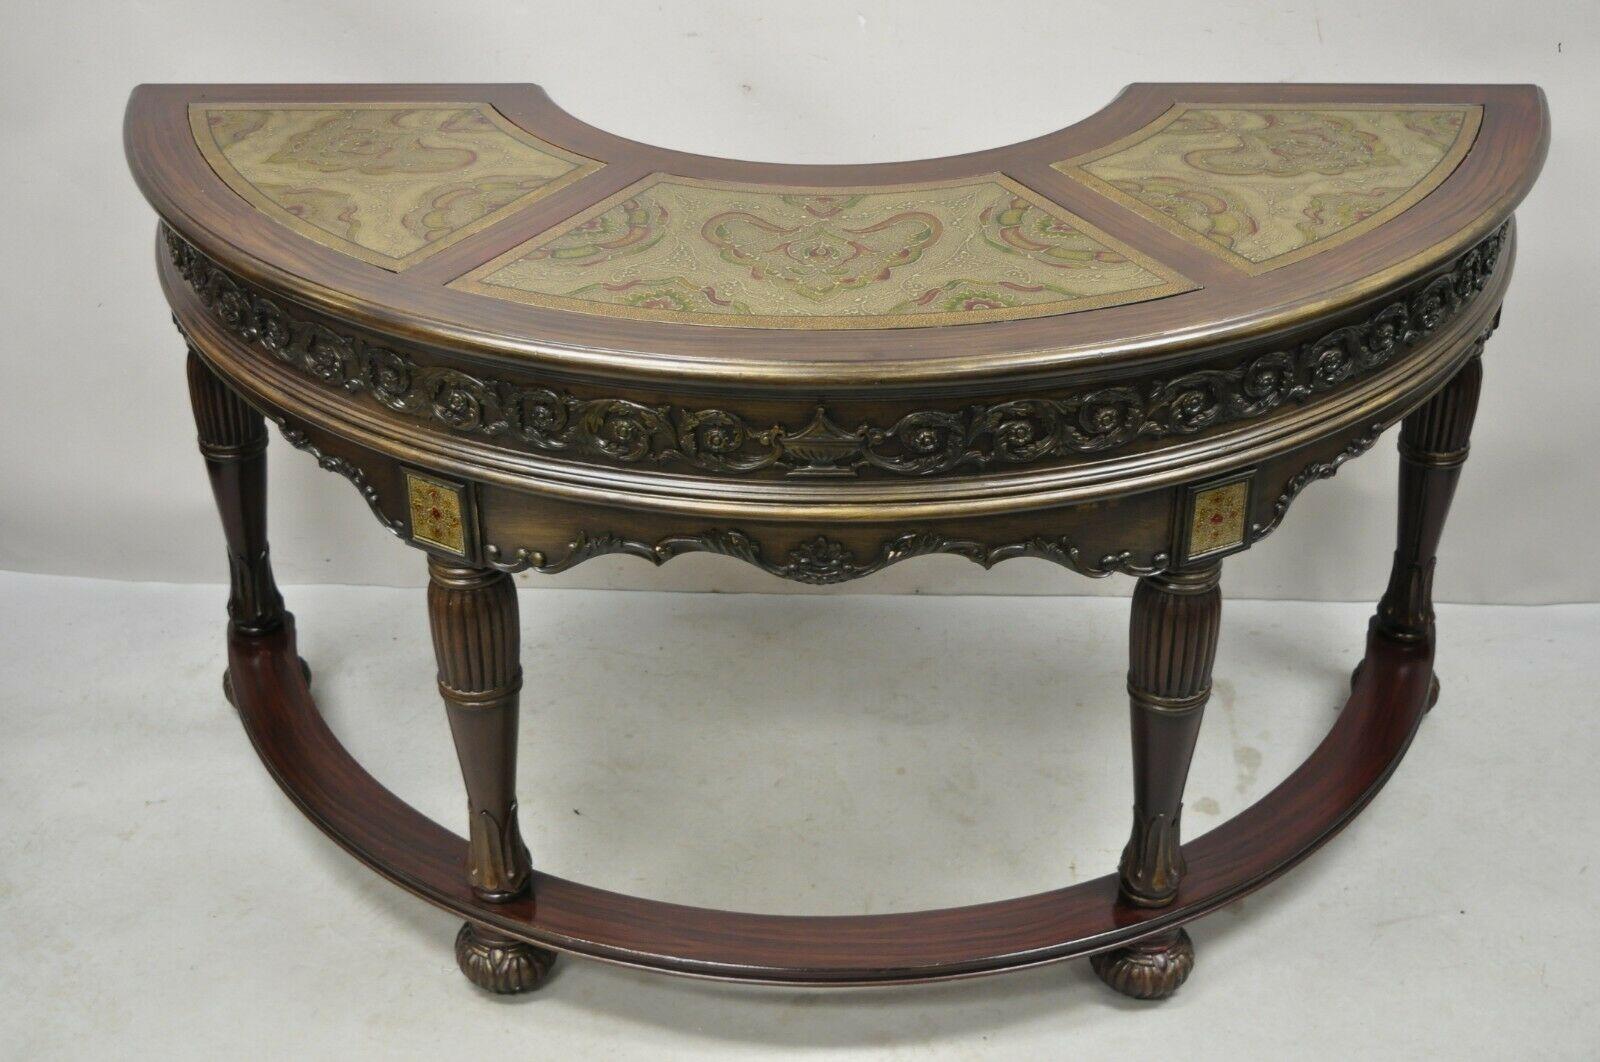 Italian Mediterranean style half round demilune 3 drawer desk. Item features a half round demilune form, removable inset glass panels, Center glass can be changed to writing surface. (see pics 4-6), 3 drawers, great style and form. Late 20th - Early